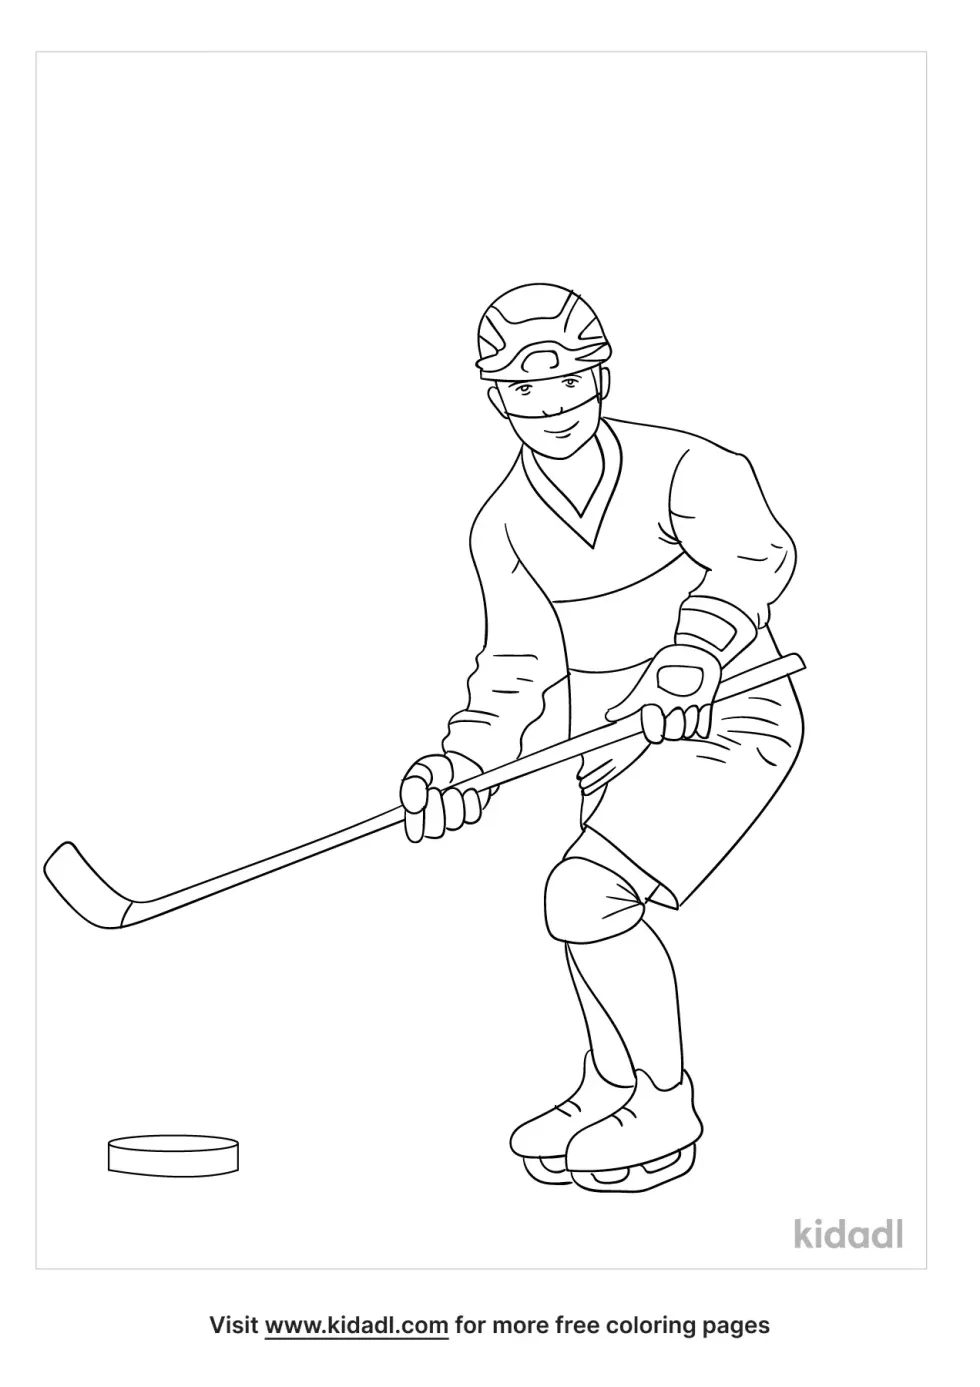 Hockey Player In A Line